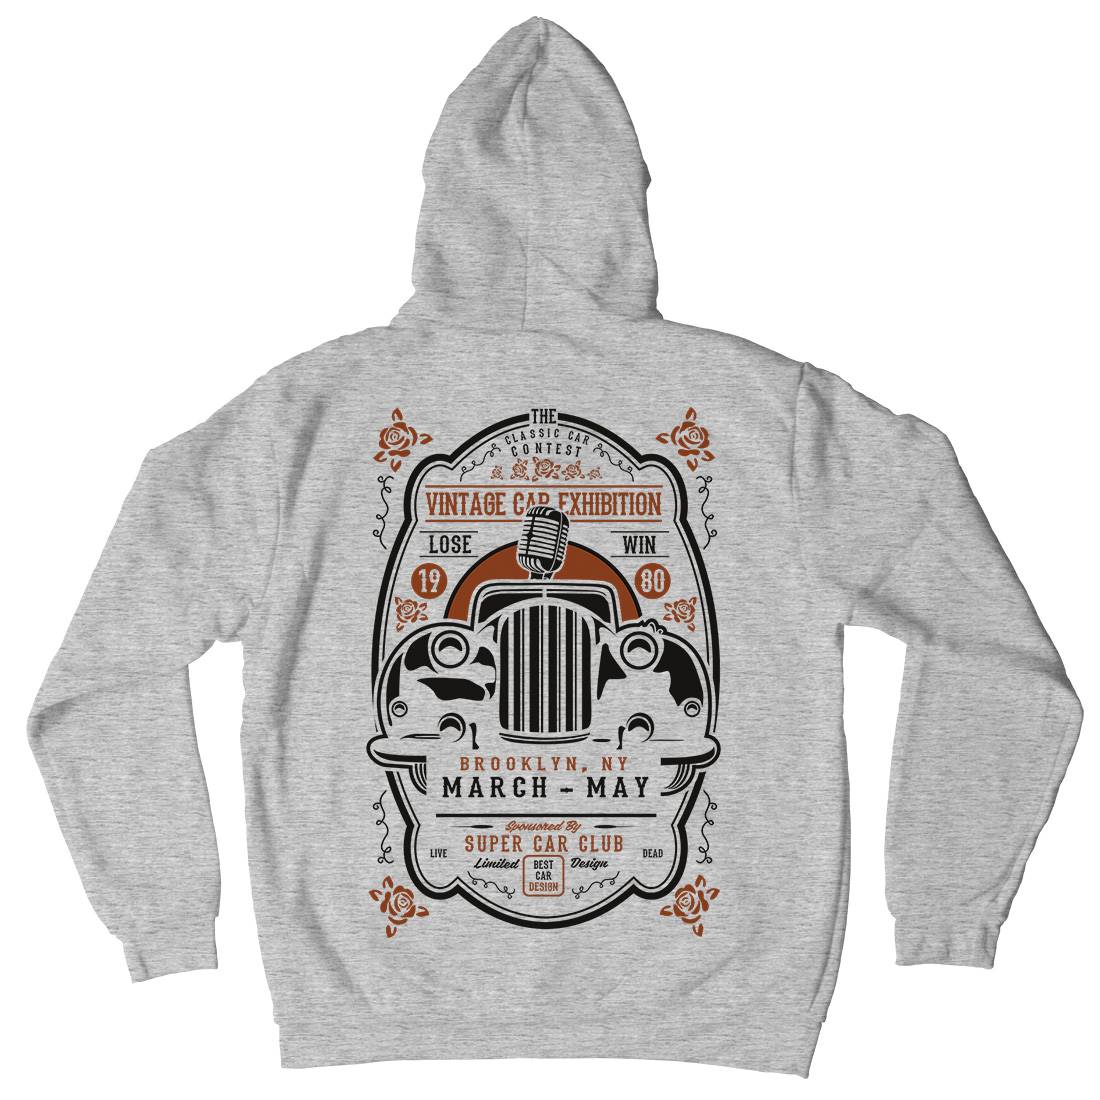 Vintage Car Exhibition Mens Hoodie With Pocket Cars B268